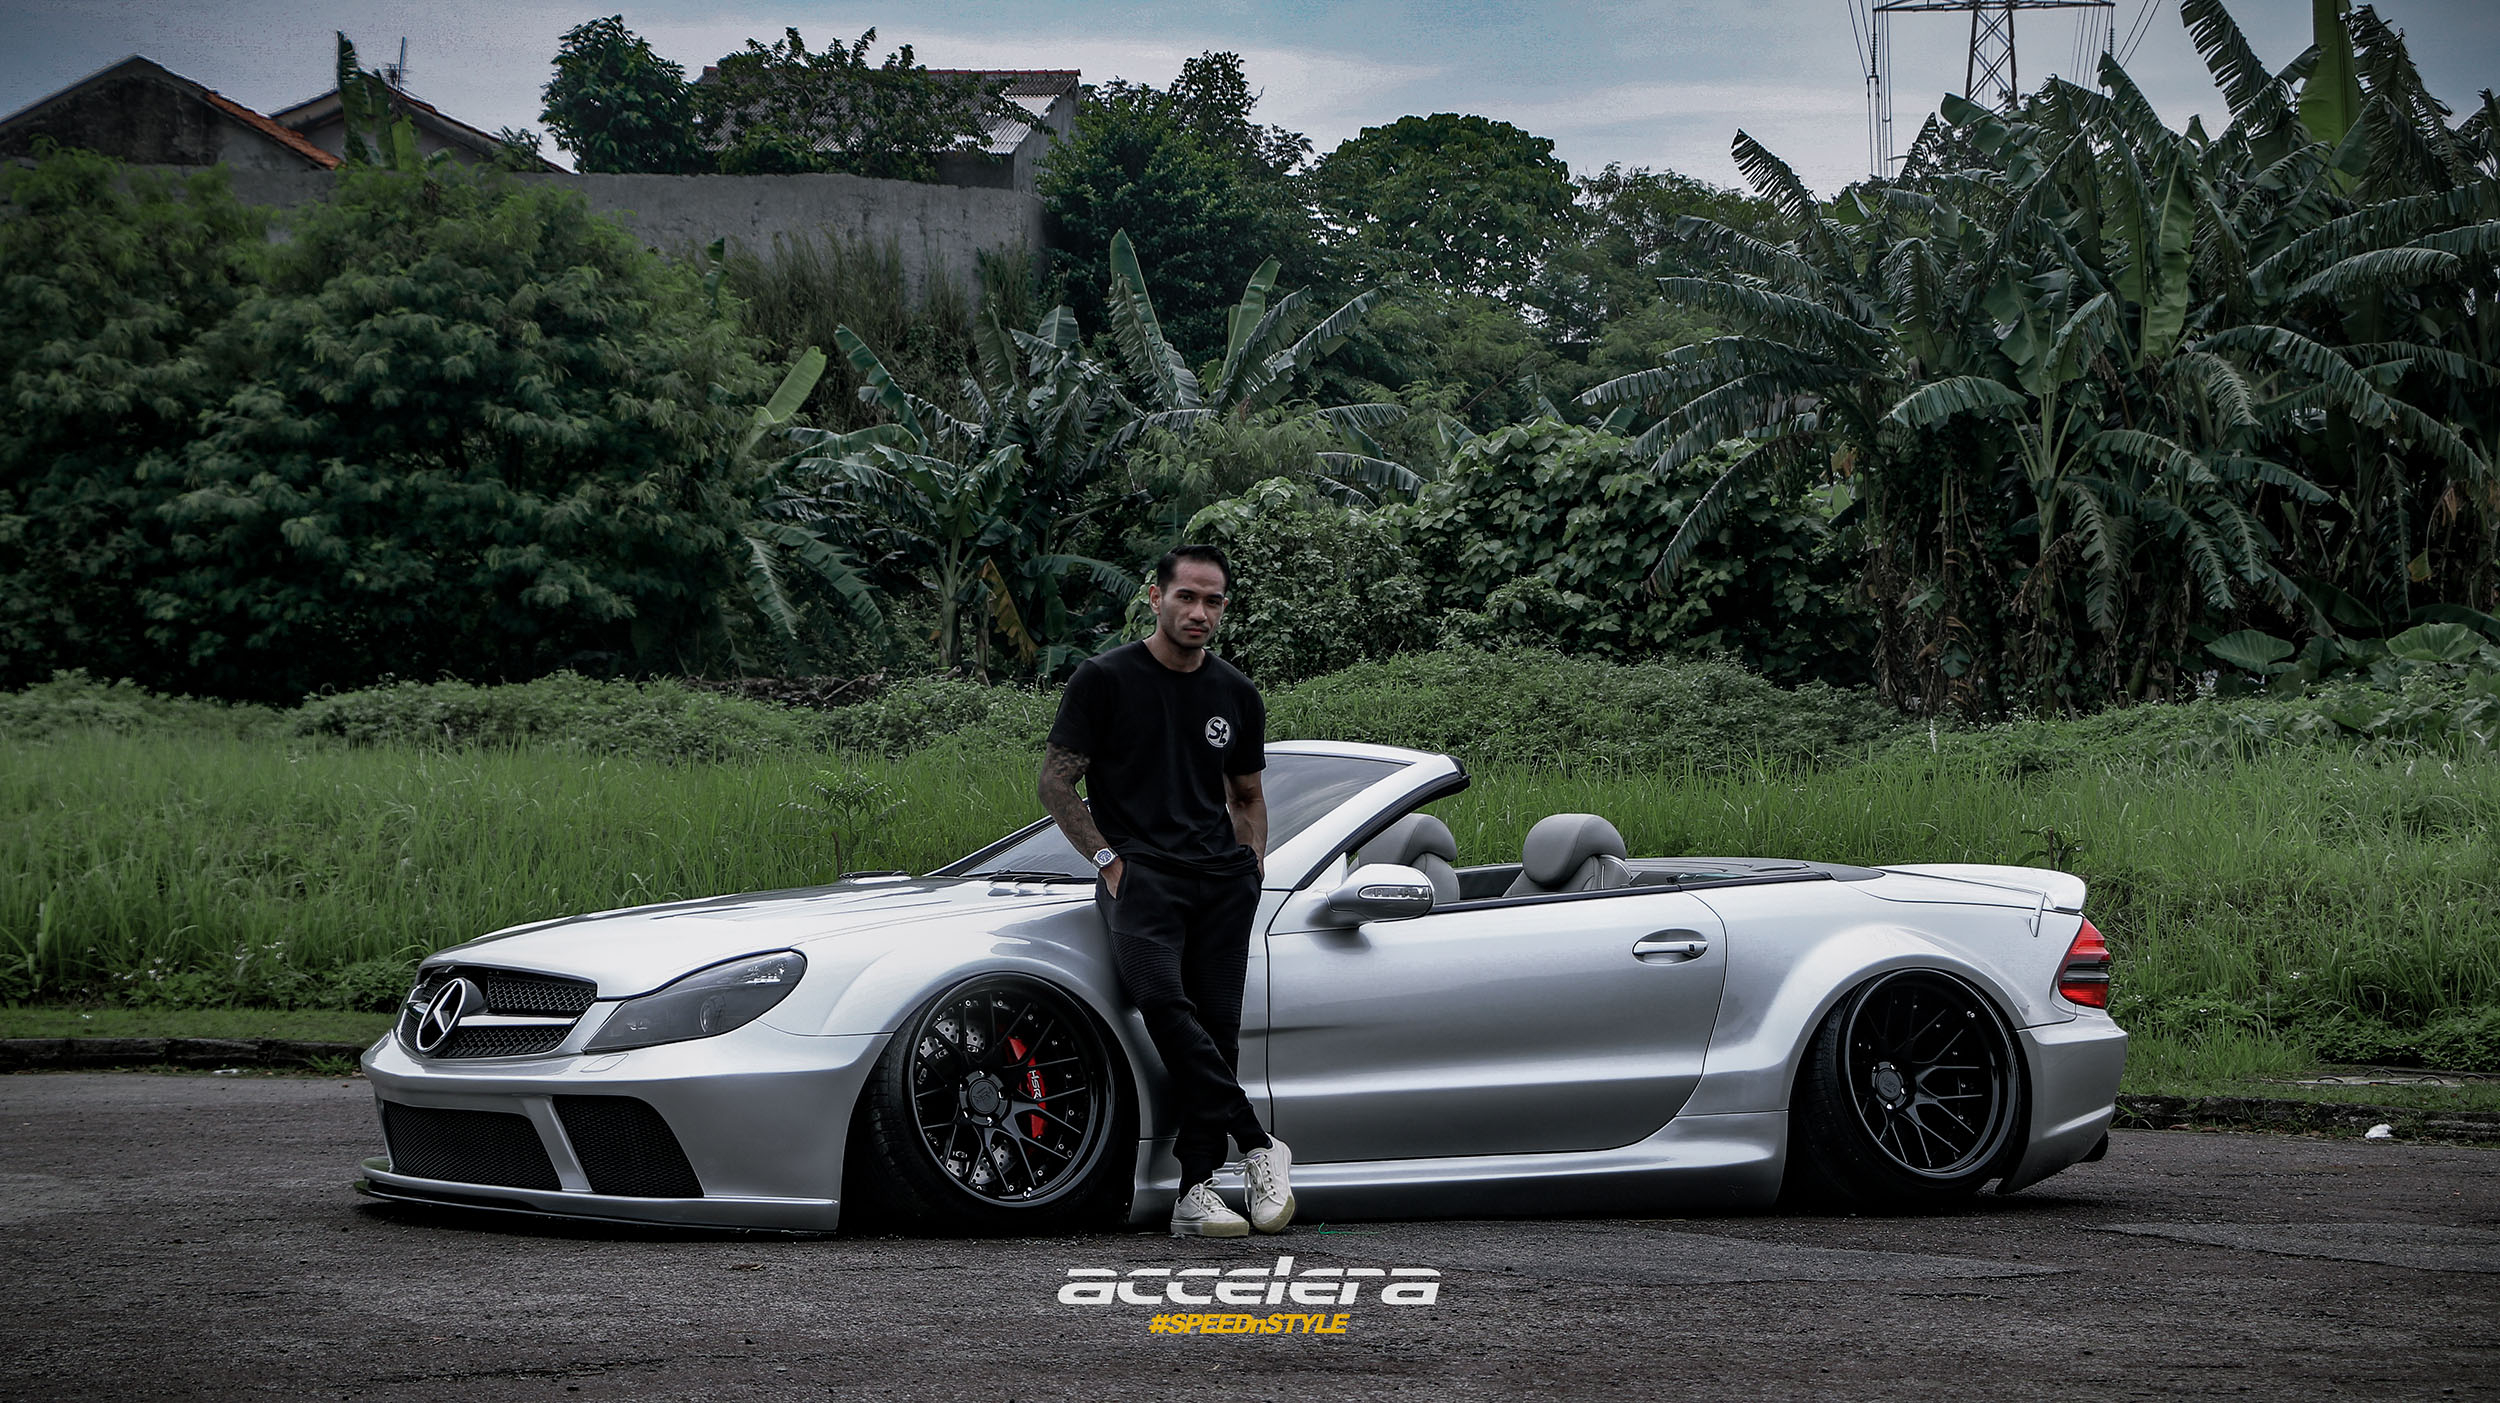 Super Concave On Mercedes-Benz SL500, Accelera Tyre Is The Way To Go